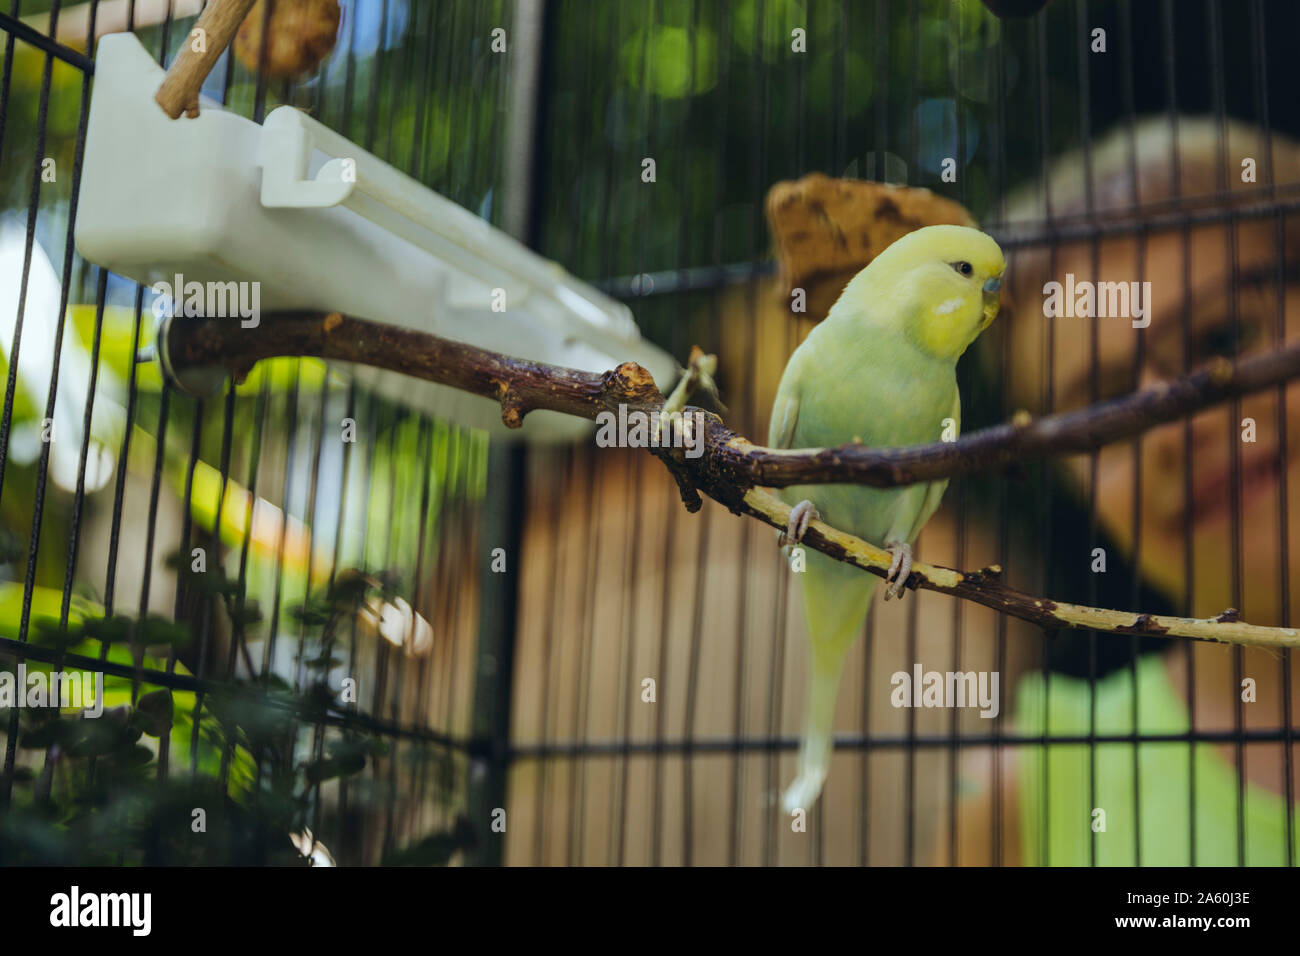 Boy watching budgie sitting in a cage on a twig Stock Photo